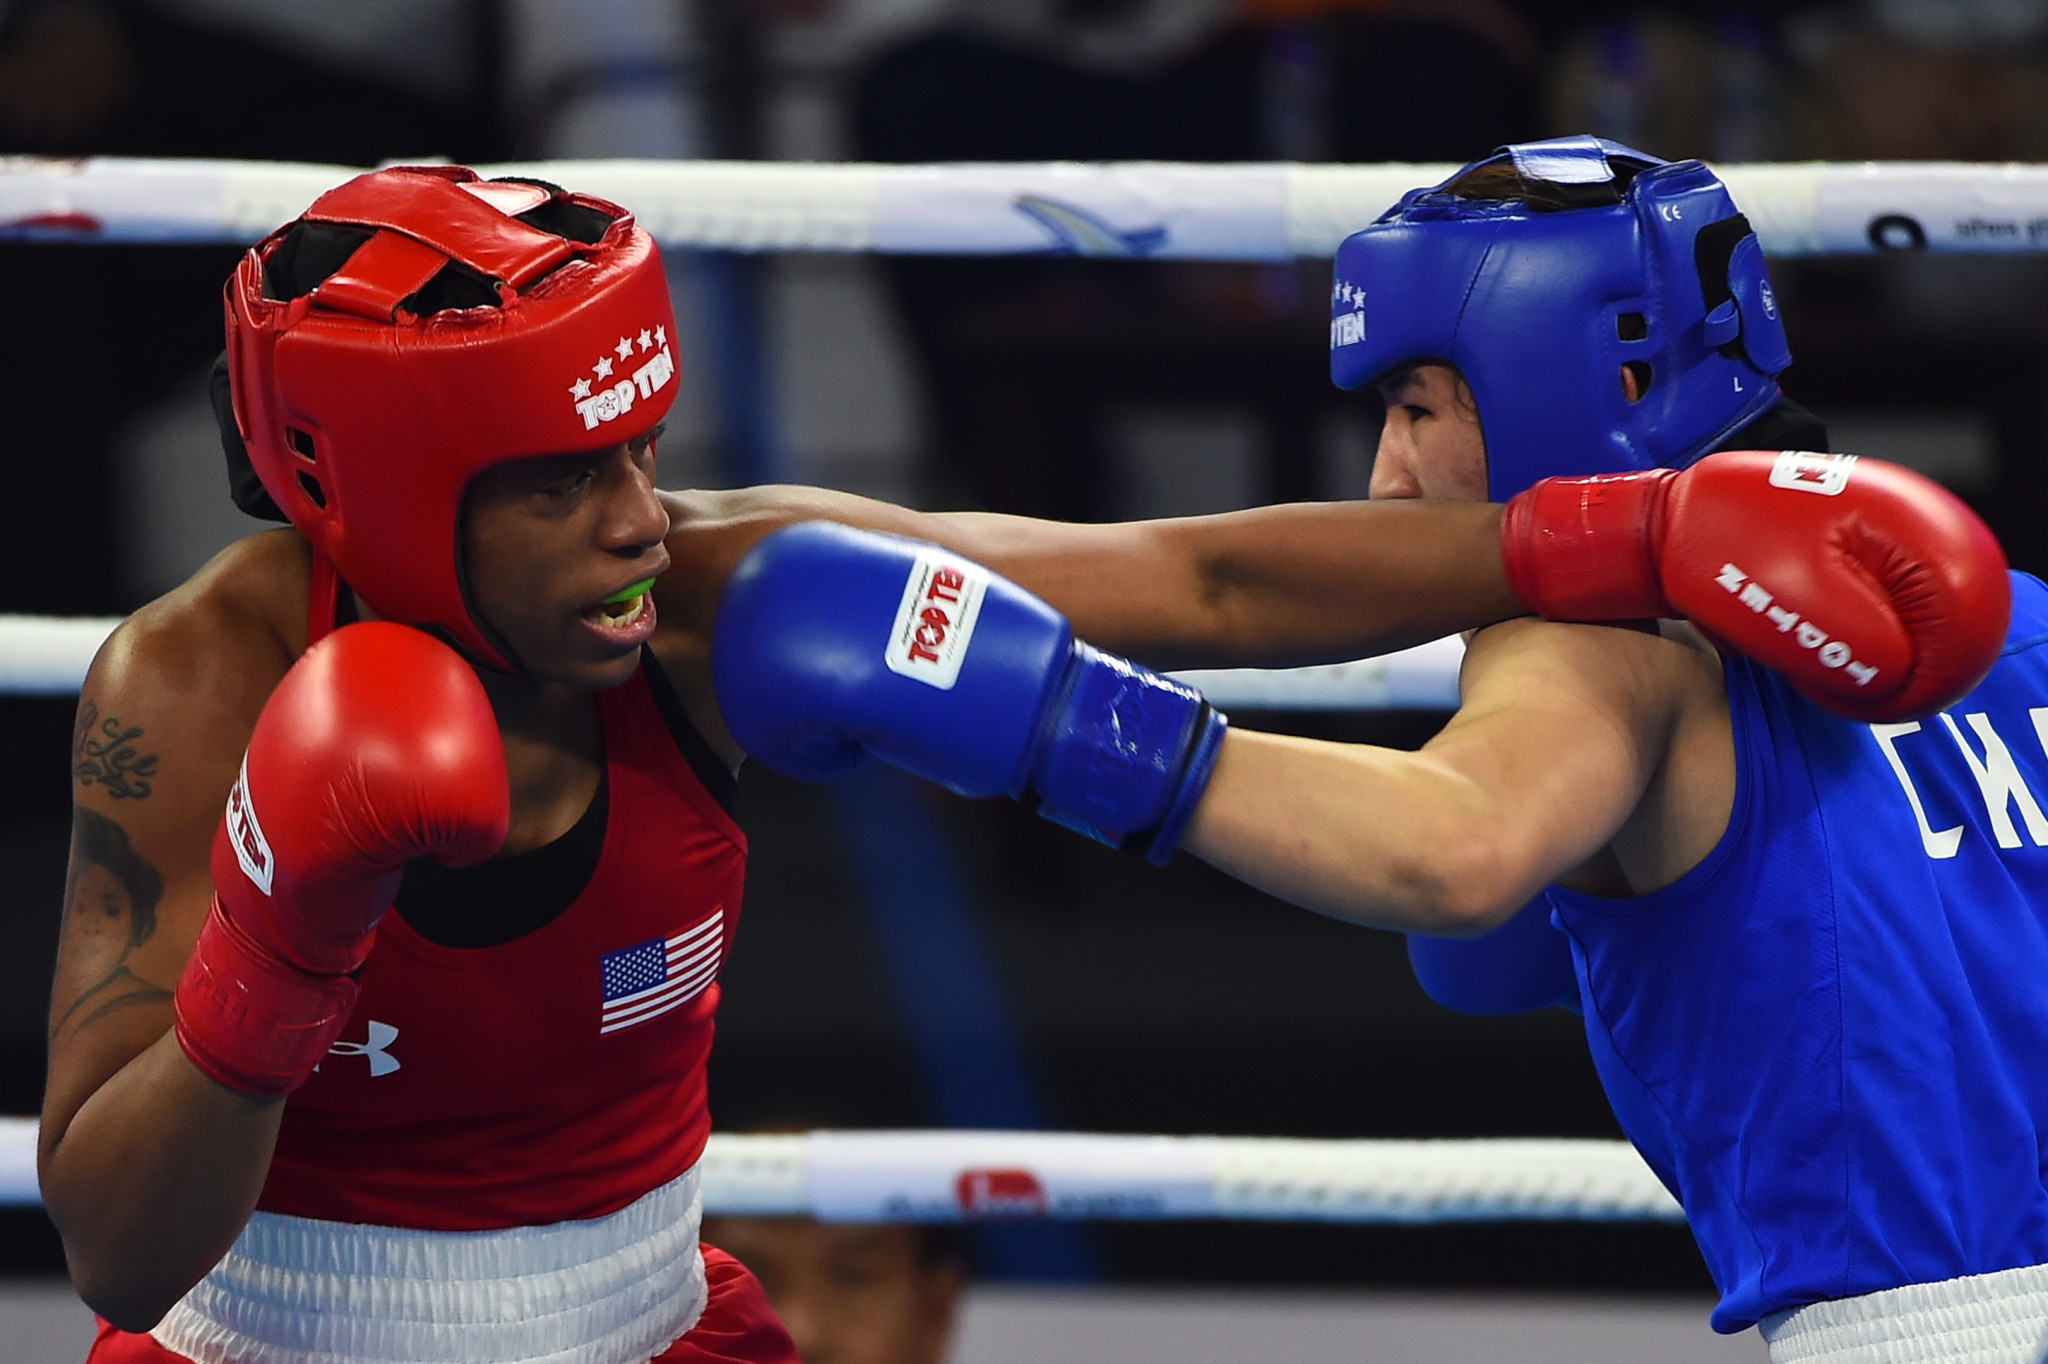 Naomi Graham of the United States won her first bout of the AIBA Women's World Championships ©Getty Images